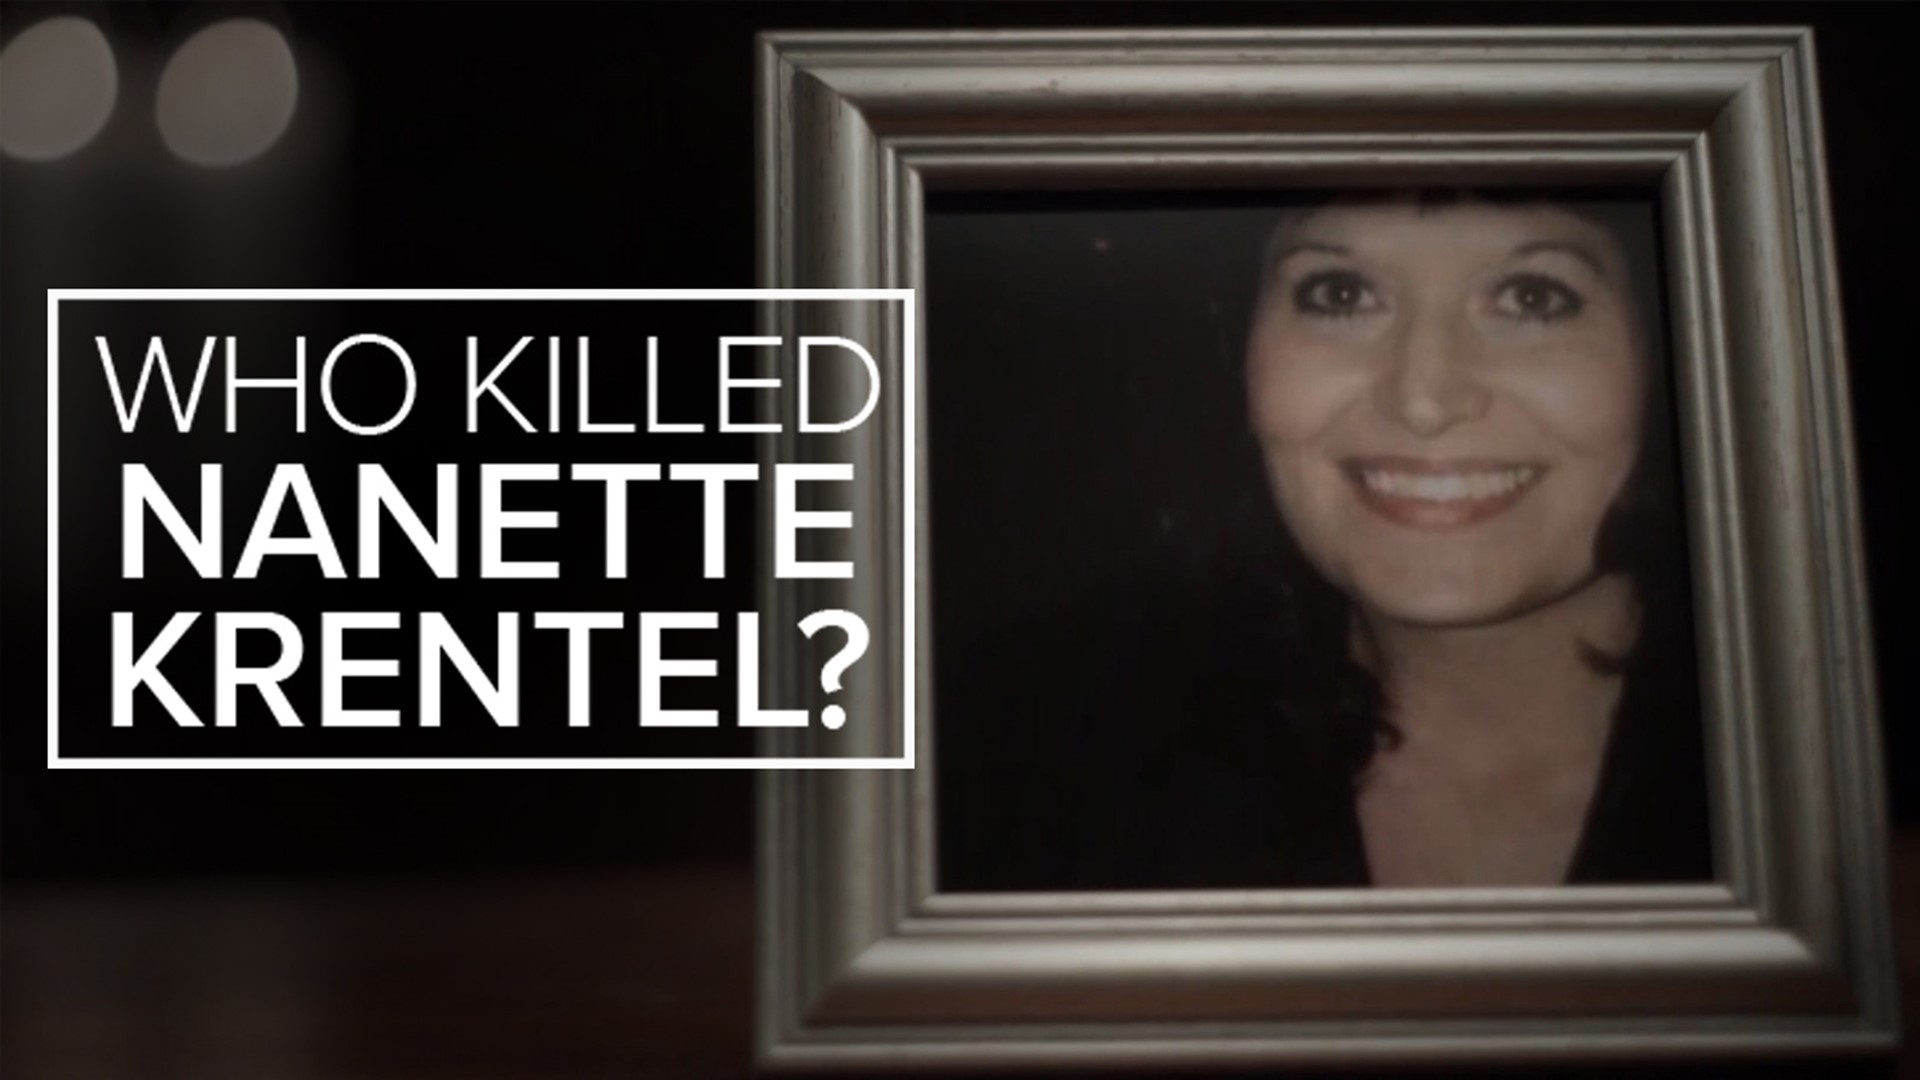 Two years after Nanette was found in her burned home with a gunshot wound to her head, her family hopes new information will cause a break in the case.